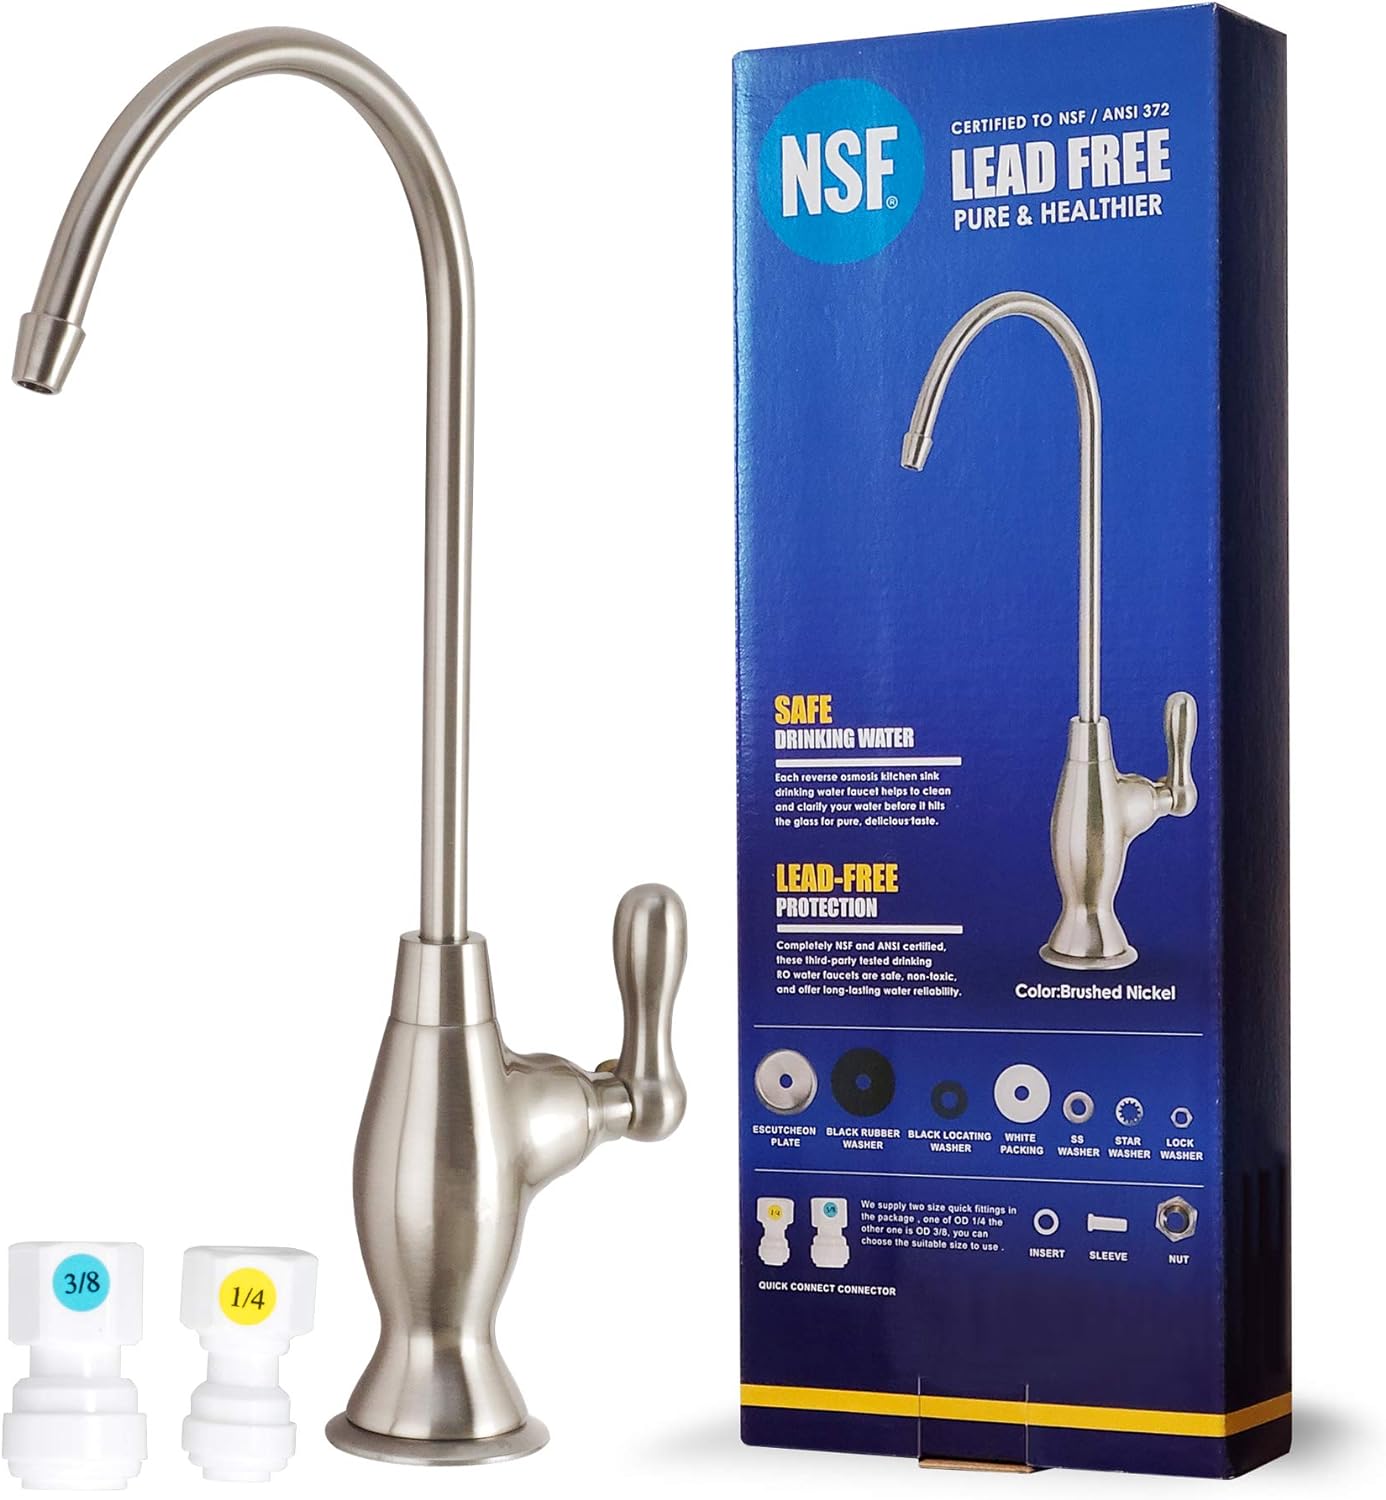 Water United Development Ltd. NSF Certification Lead-Free Water Filtration Reverse Osmosis Faucet (Brushed Nickel) Advanced RO Tap for Drinking, Kitchen Sink